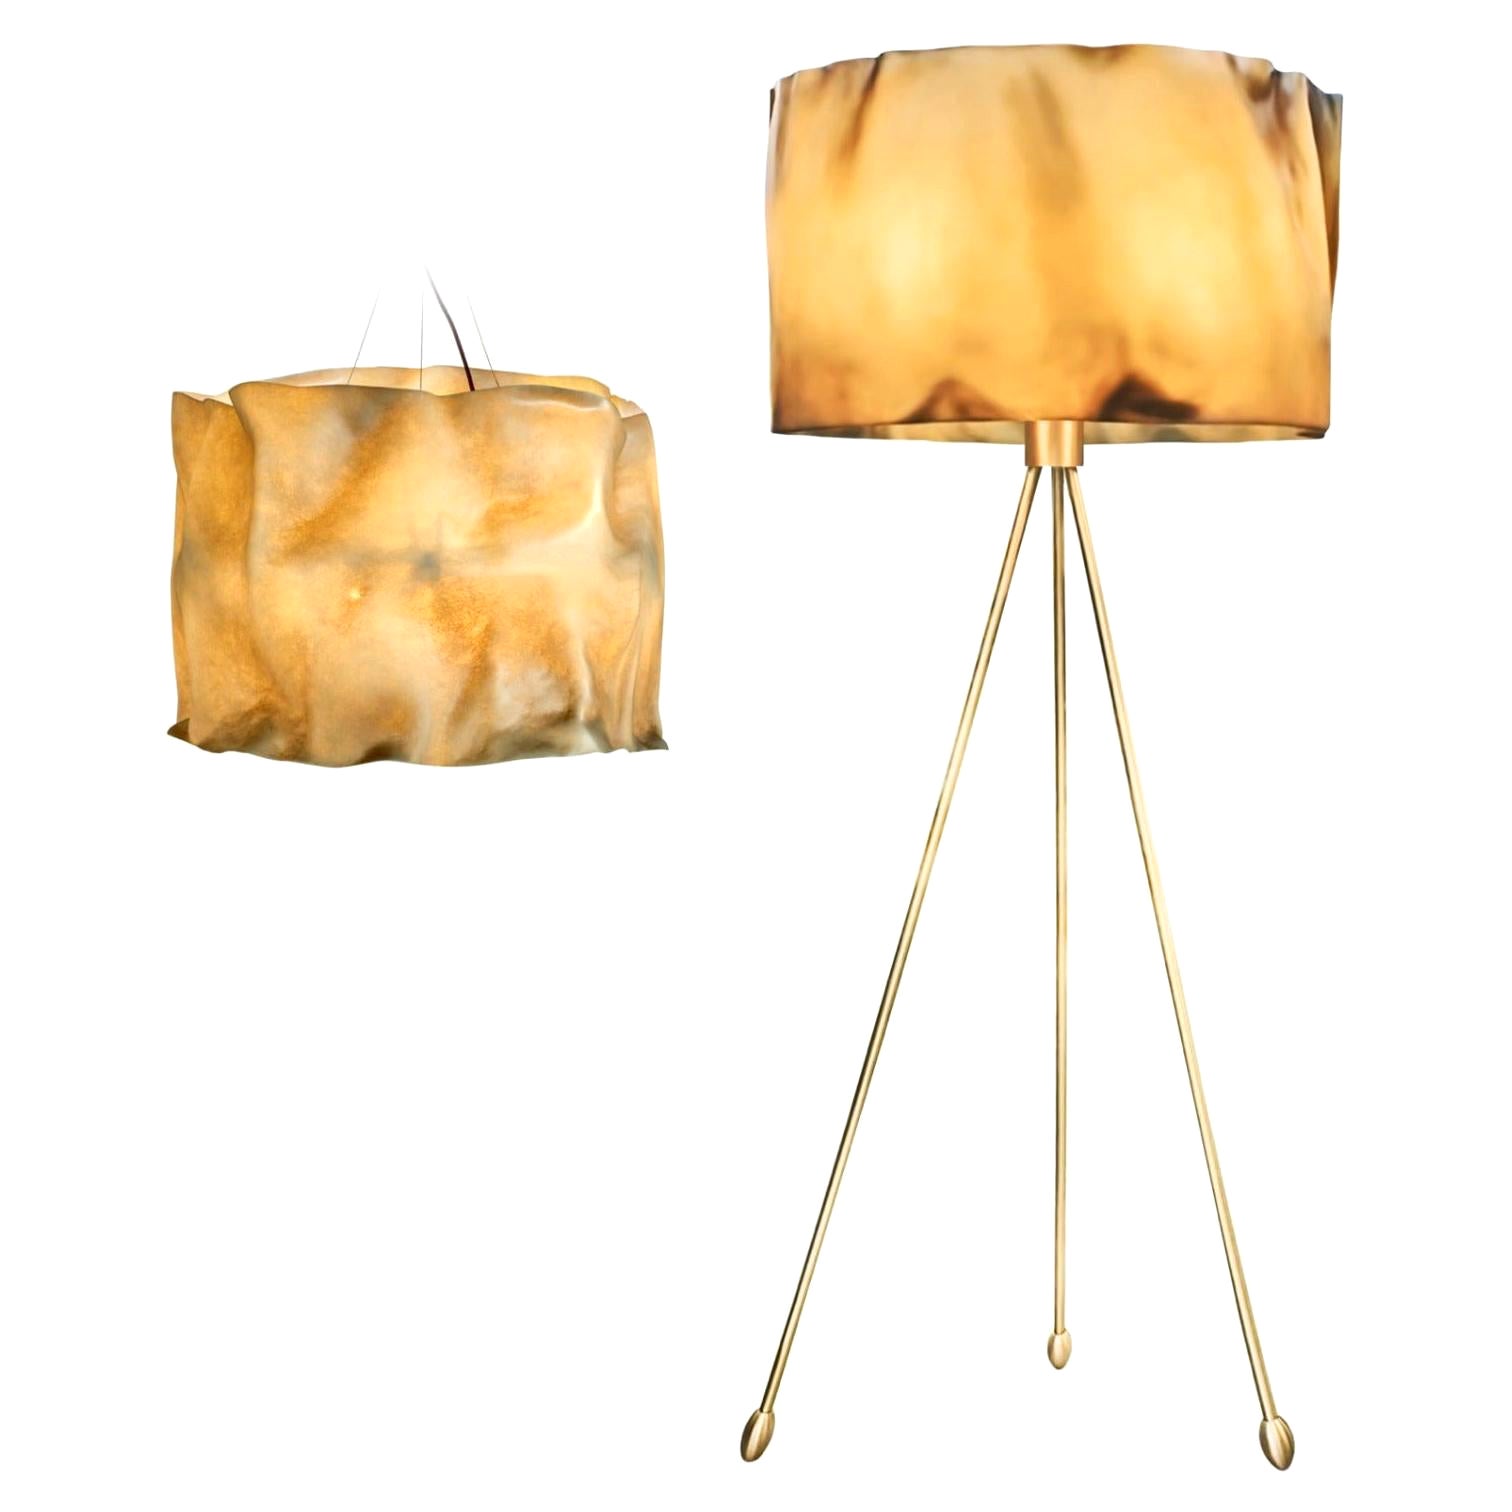 New Pair of Floor Lamp and Suspension Lamp in Resin Finished in Aged Natural